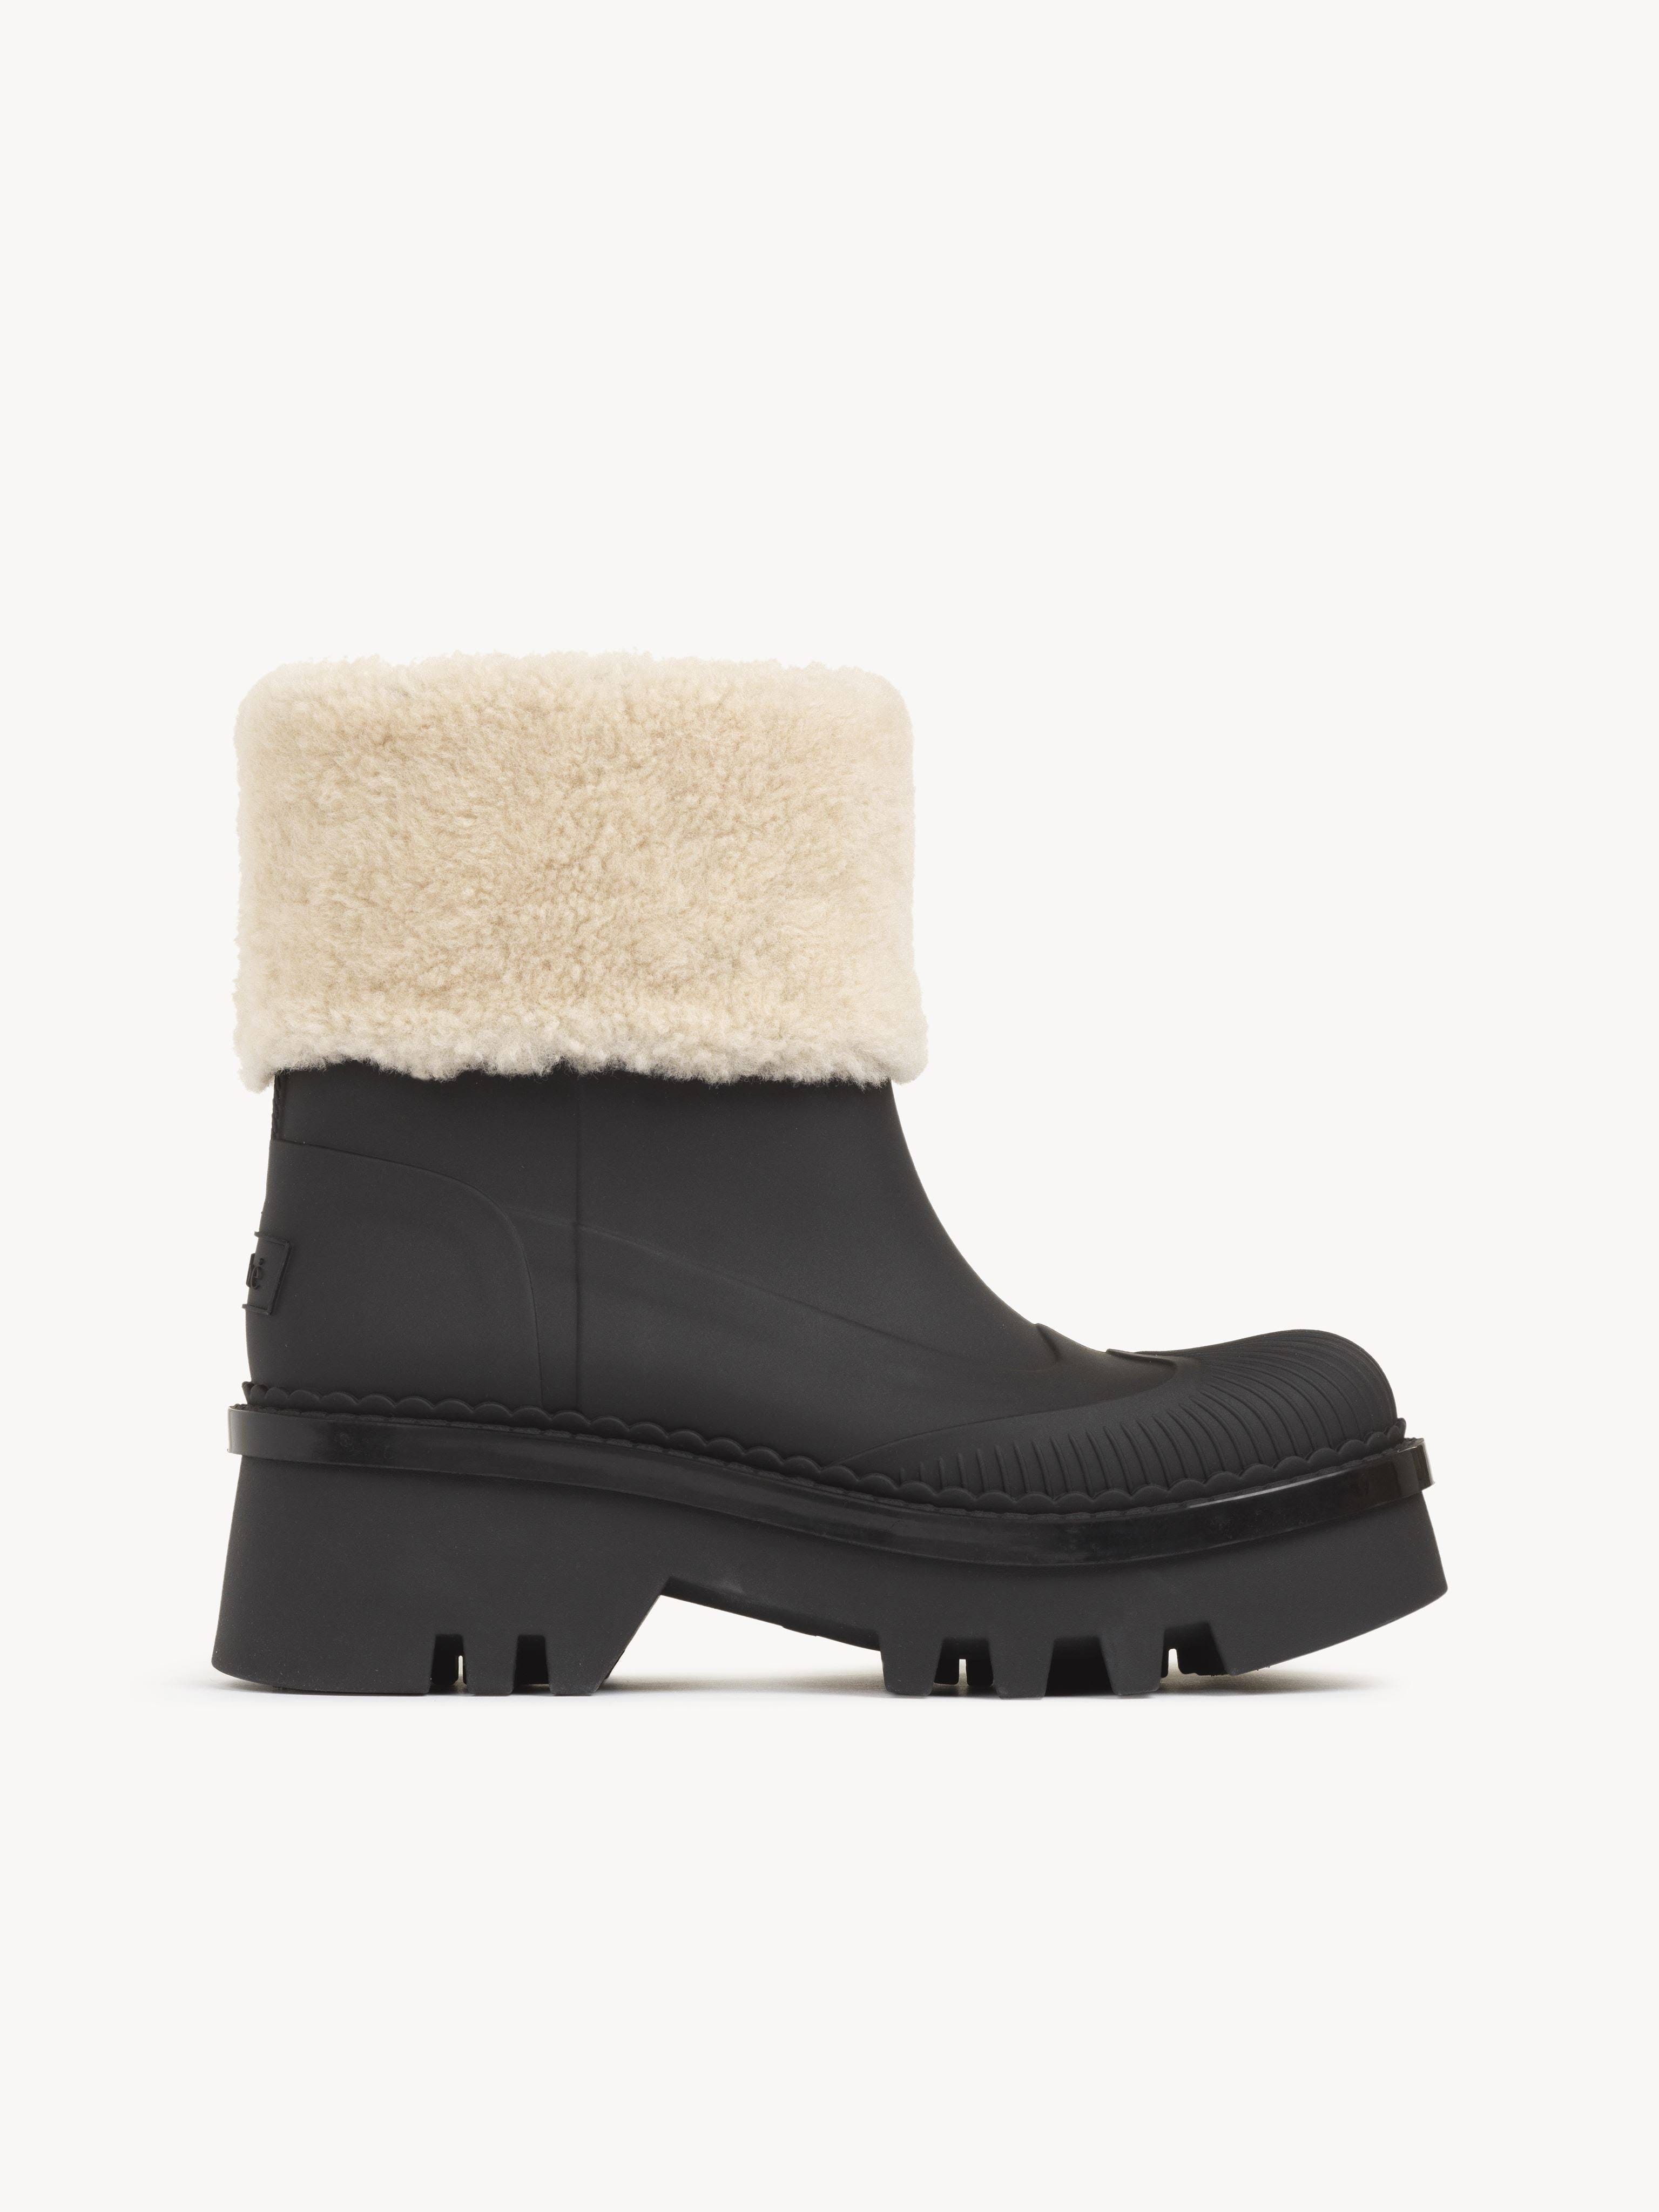 Chloé Raina Ankle Boot with Shearling Trim - Sustainable and Stylish | Image